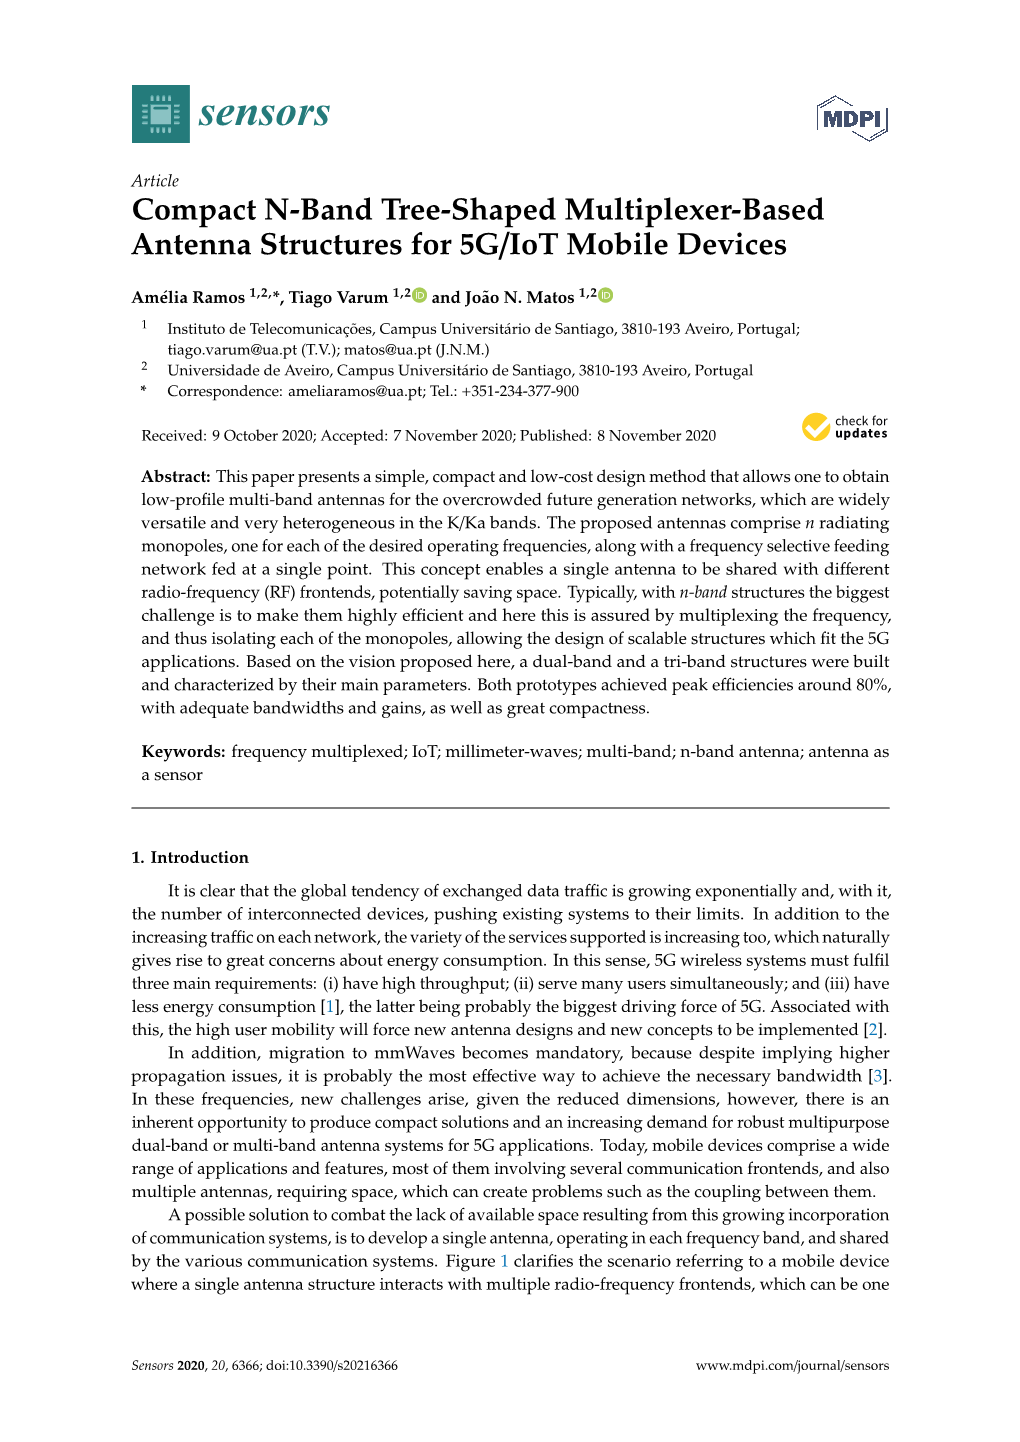 Compact N-Band Tree-Shaped Multiplexer-Based Antenna Structures for 5G/Iot Mobile Devices